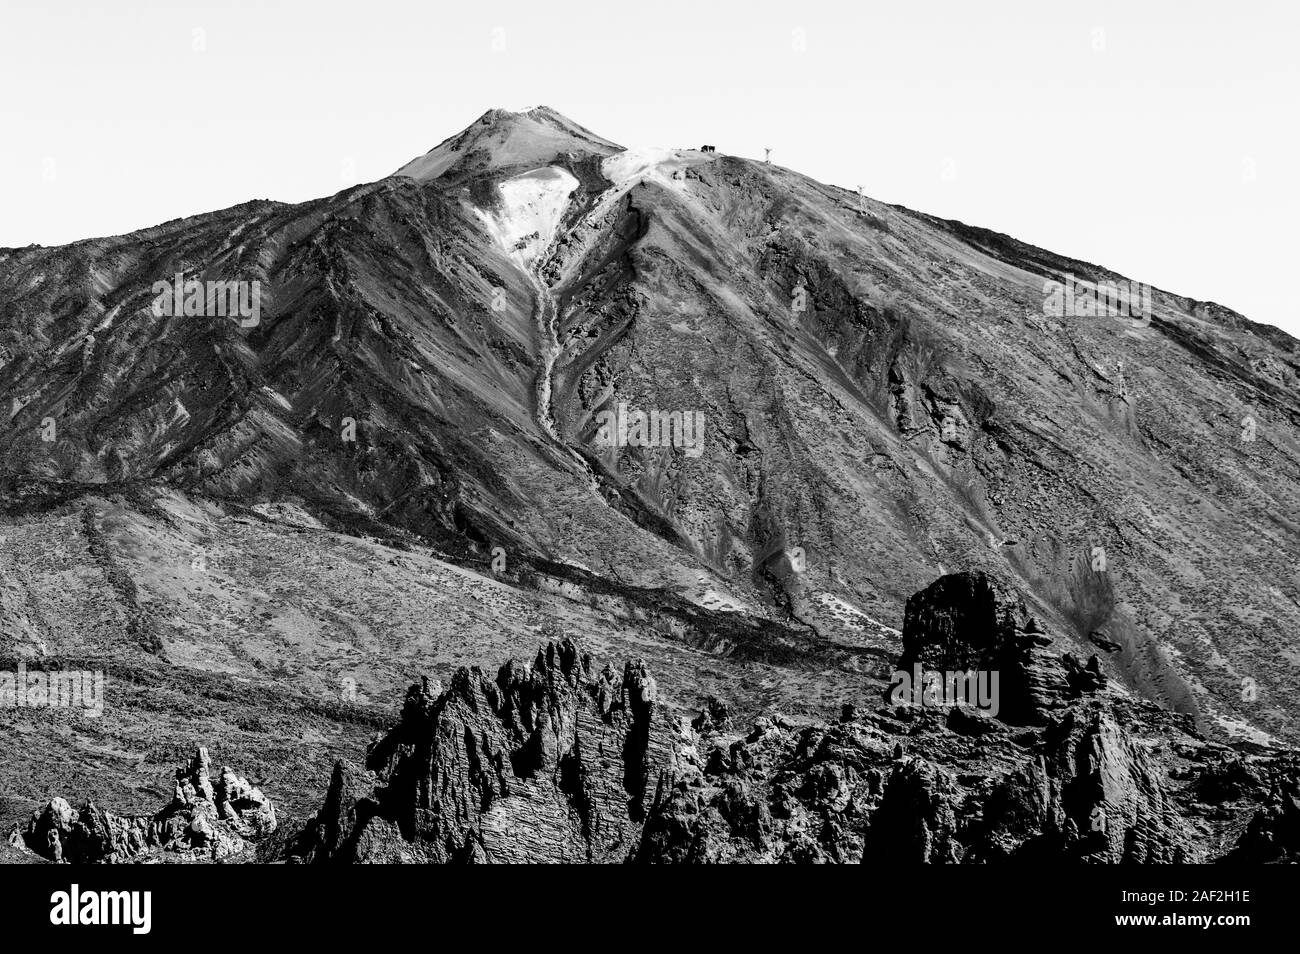 Black And White Shot Of The Highest Peak Behind Formations Of Lava Rocks On A Sunny And Very Clear Day In El Teide National Park. April 13, 2019. Sant Stock Photo